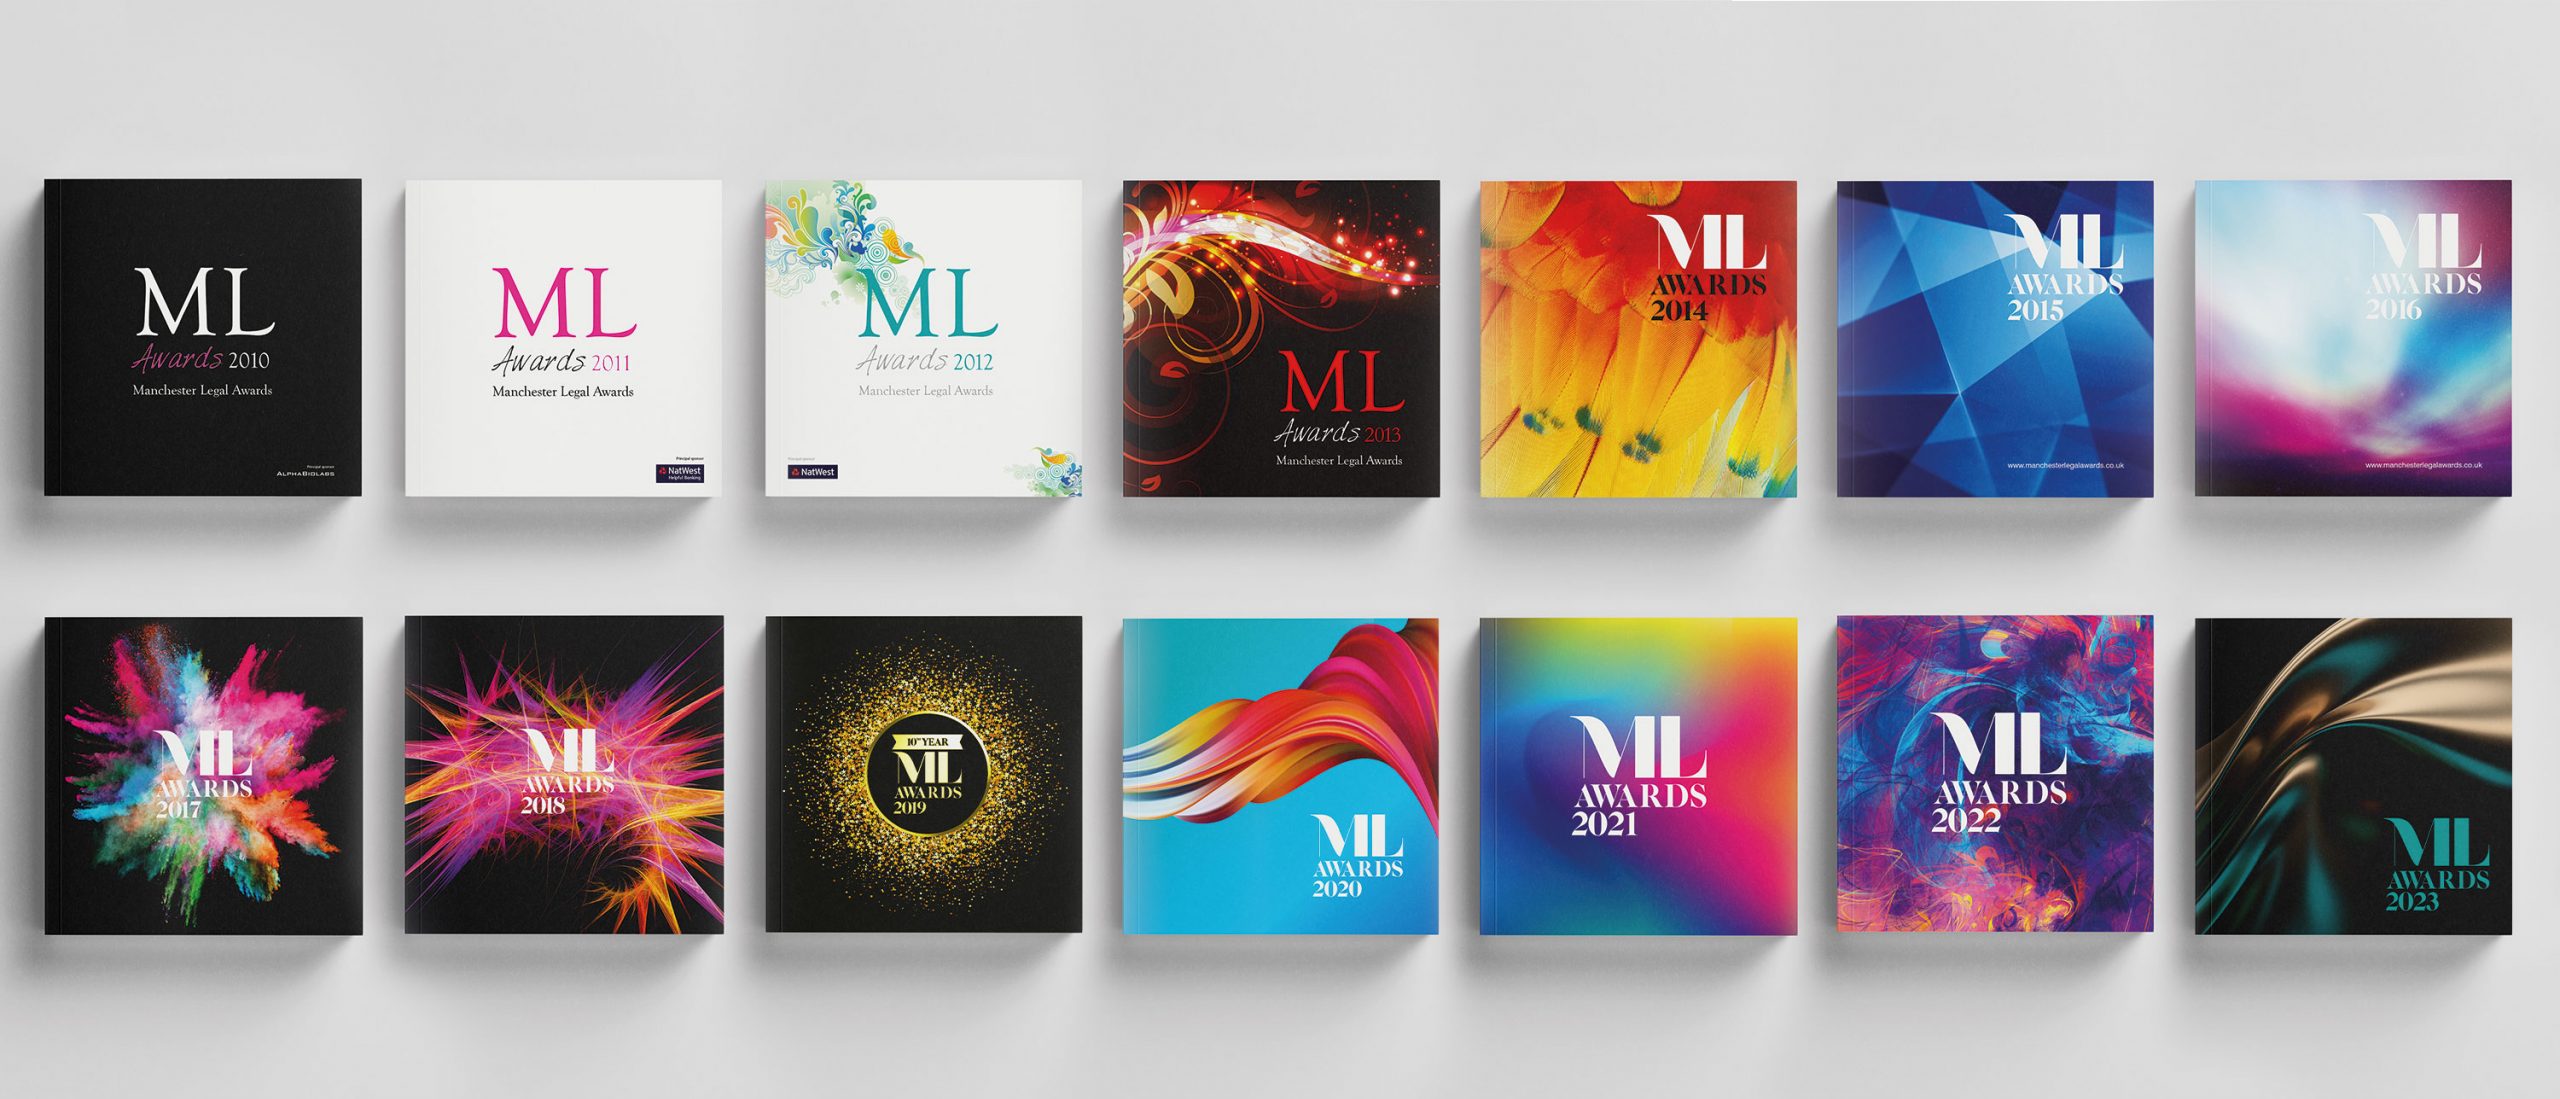 How we used a fully integrated approach to promote the Manchester Legal Awards image